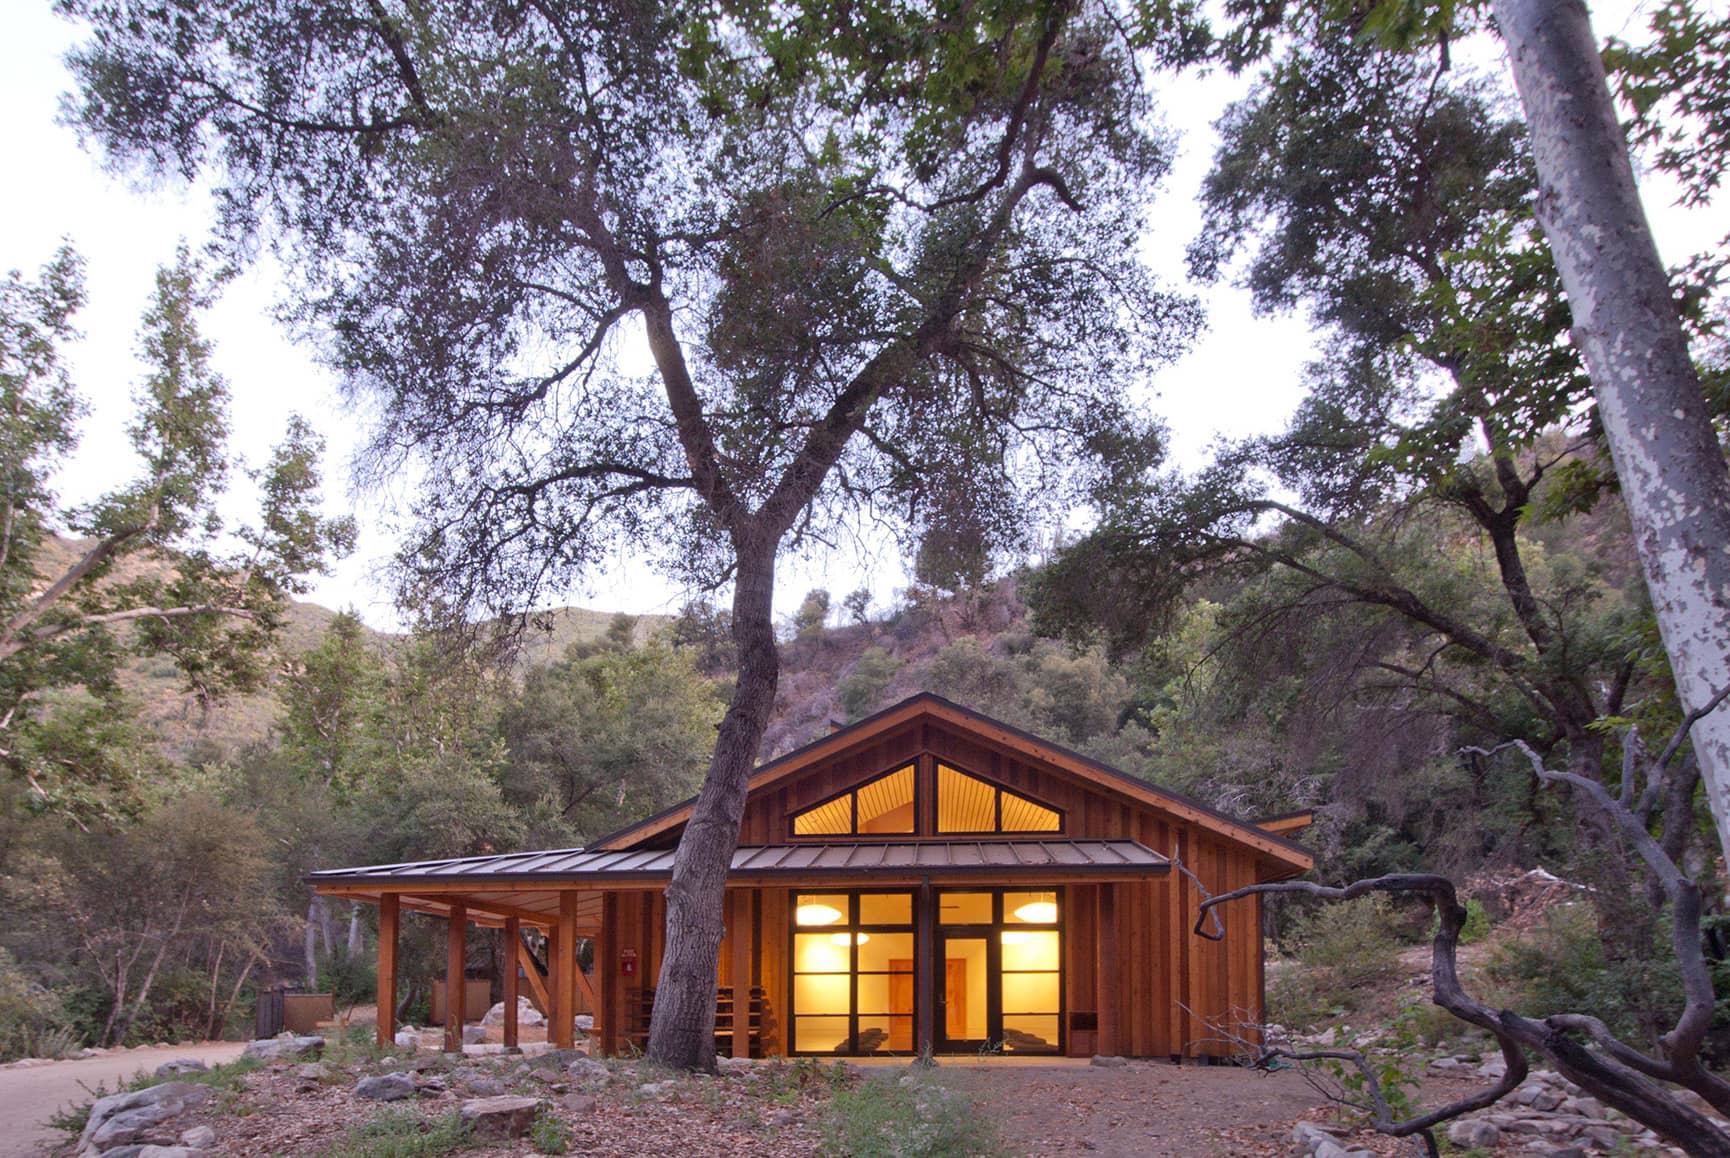 Exterior side view of newly constructed building used as a yoga retreat nestled in the woods.